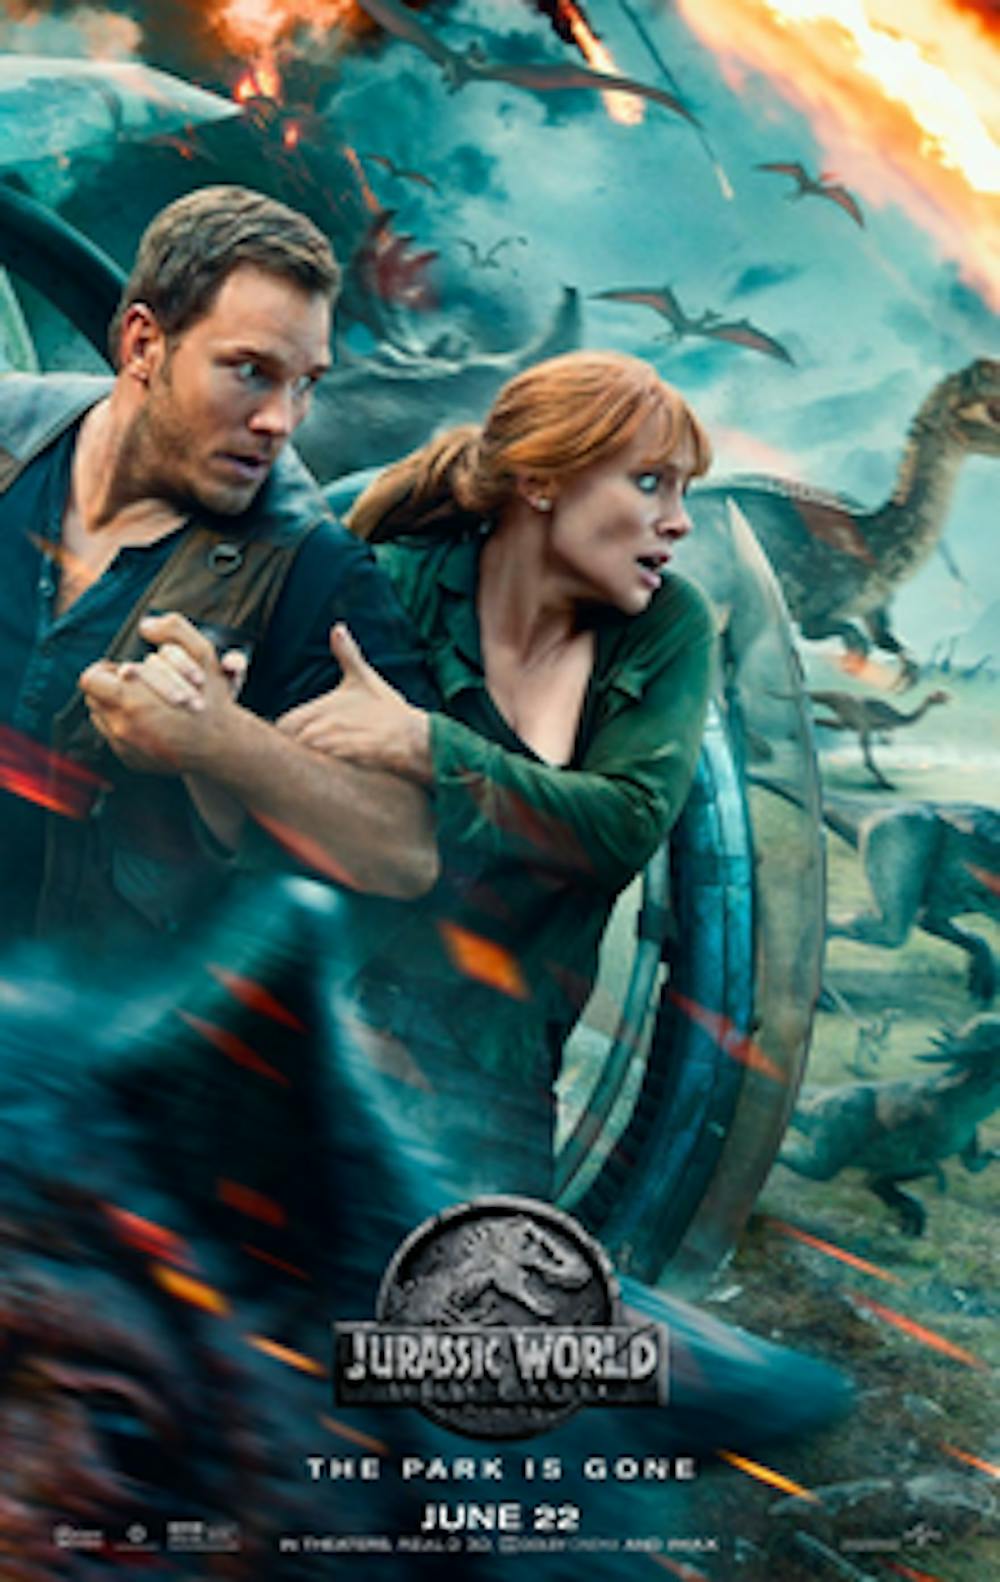 <p>It has its entertaining, flashy moments, but "Jurassic World: Fallen Kingdom" is hindered by a needlessly complicated plot and stale dialogue.</p>